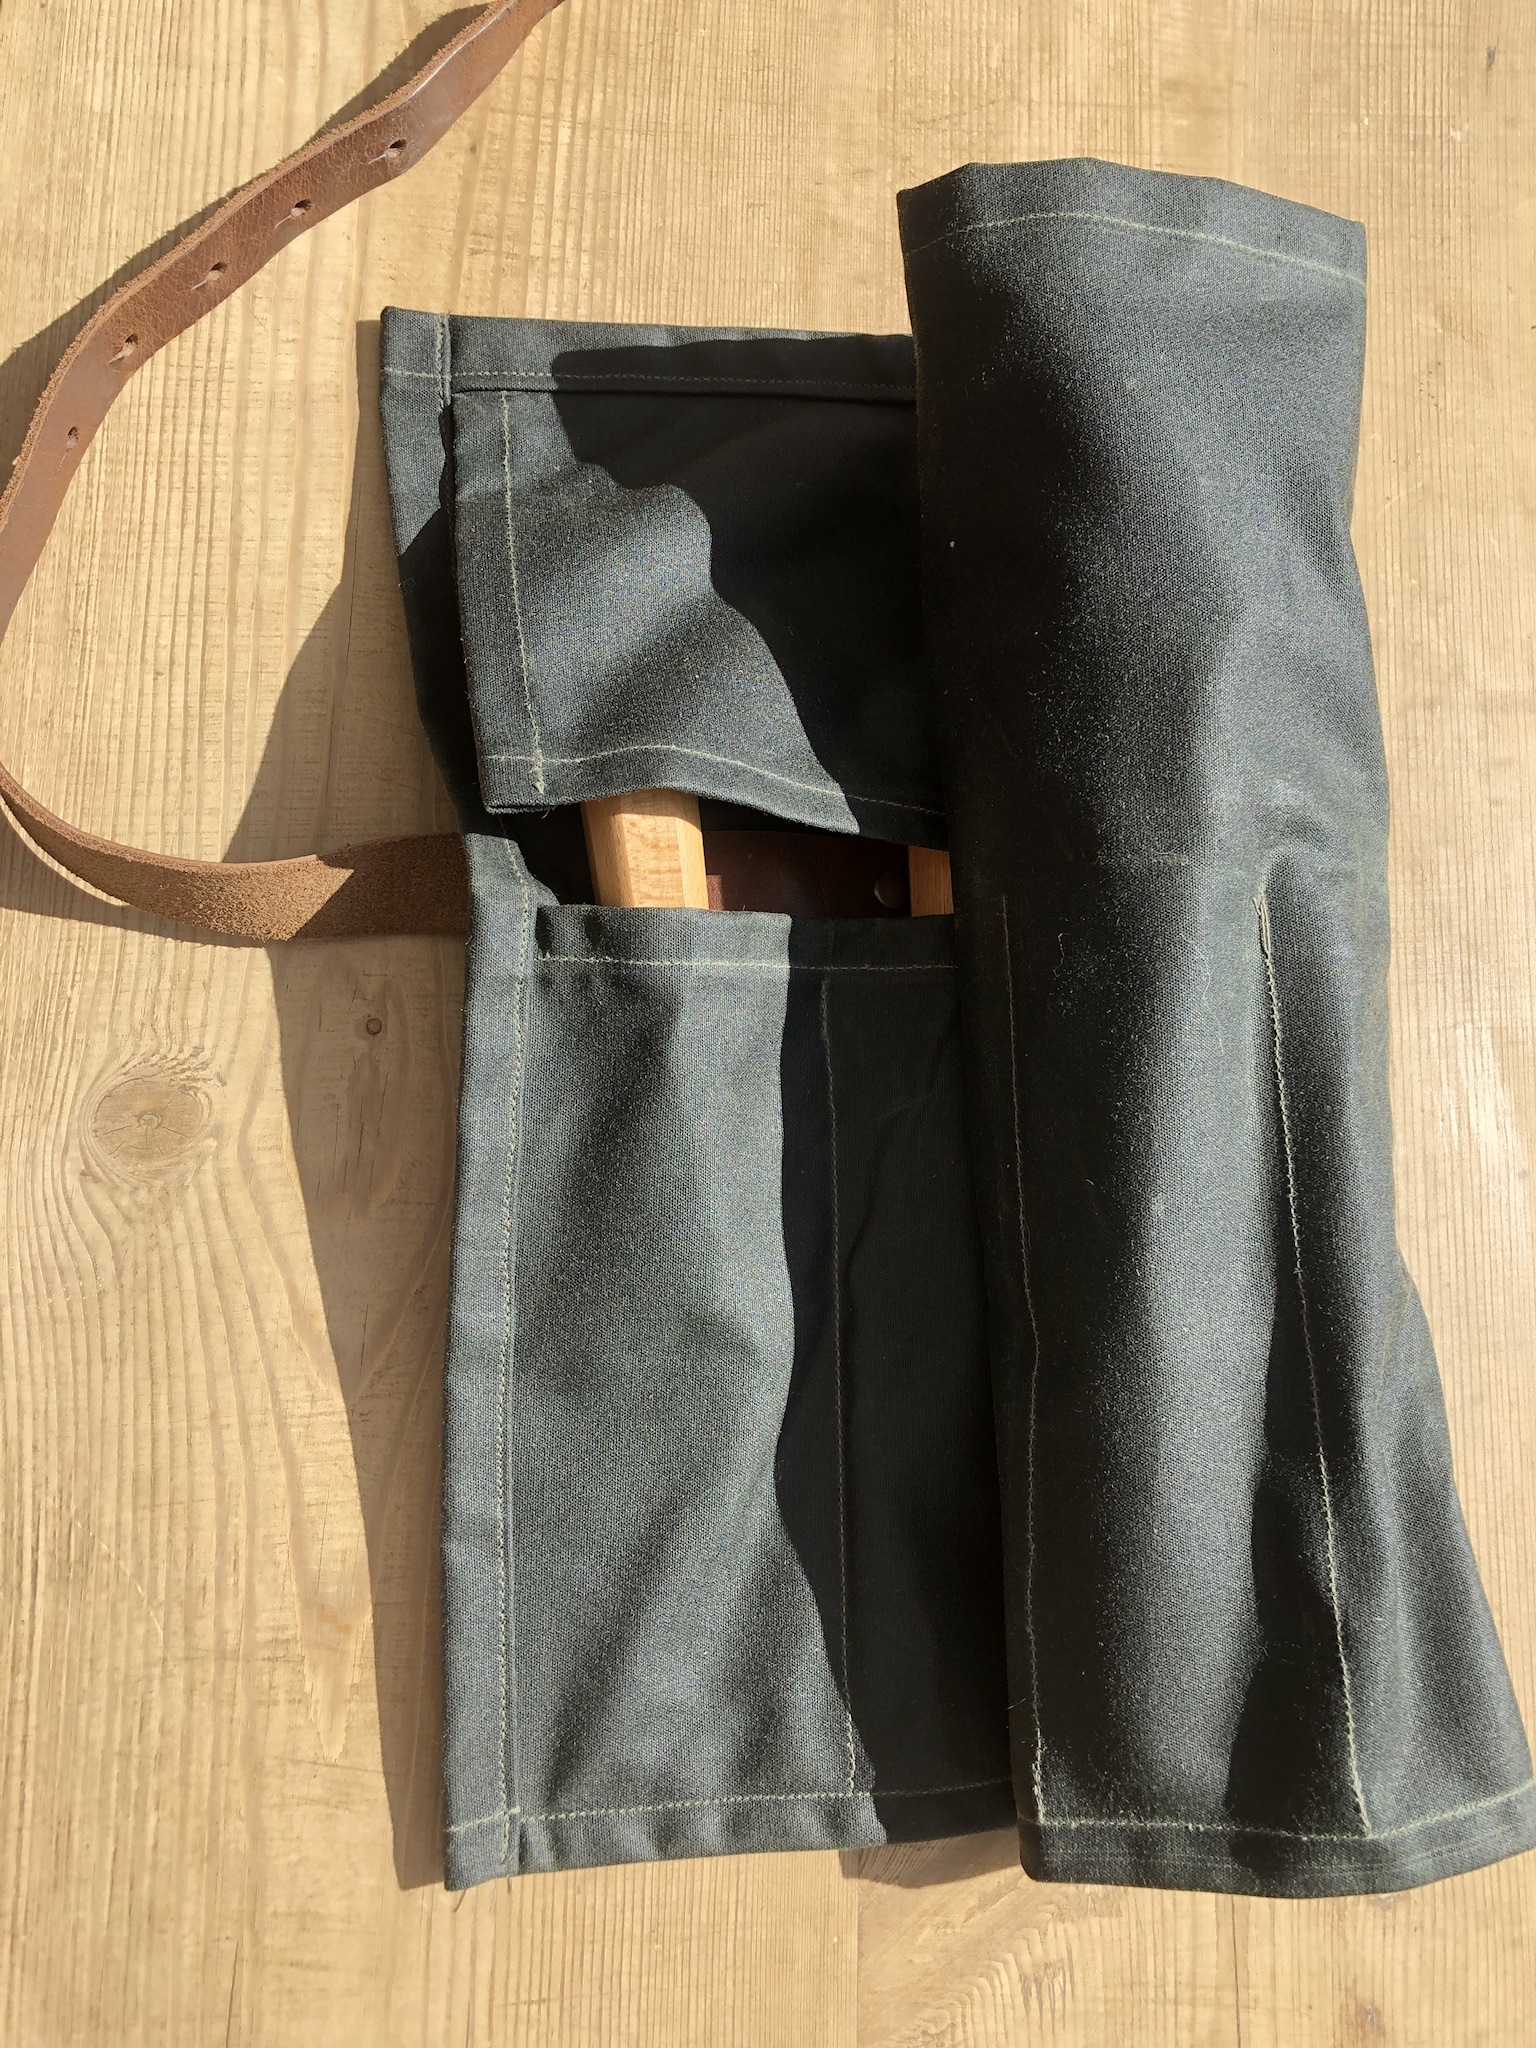 Waxed canvas and leather tool roll 